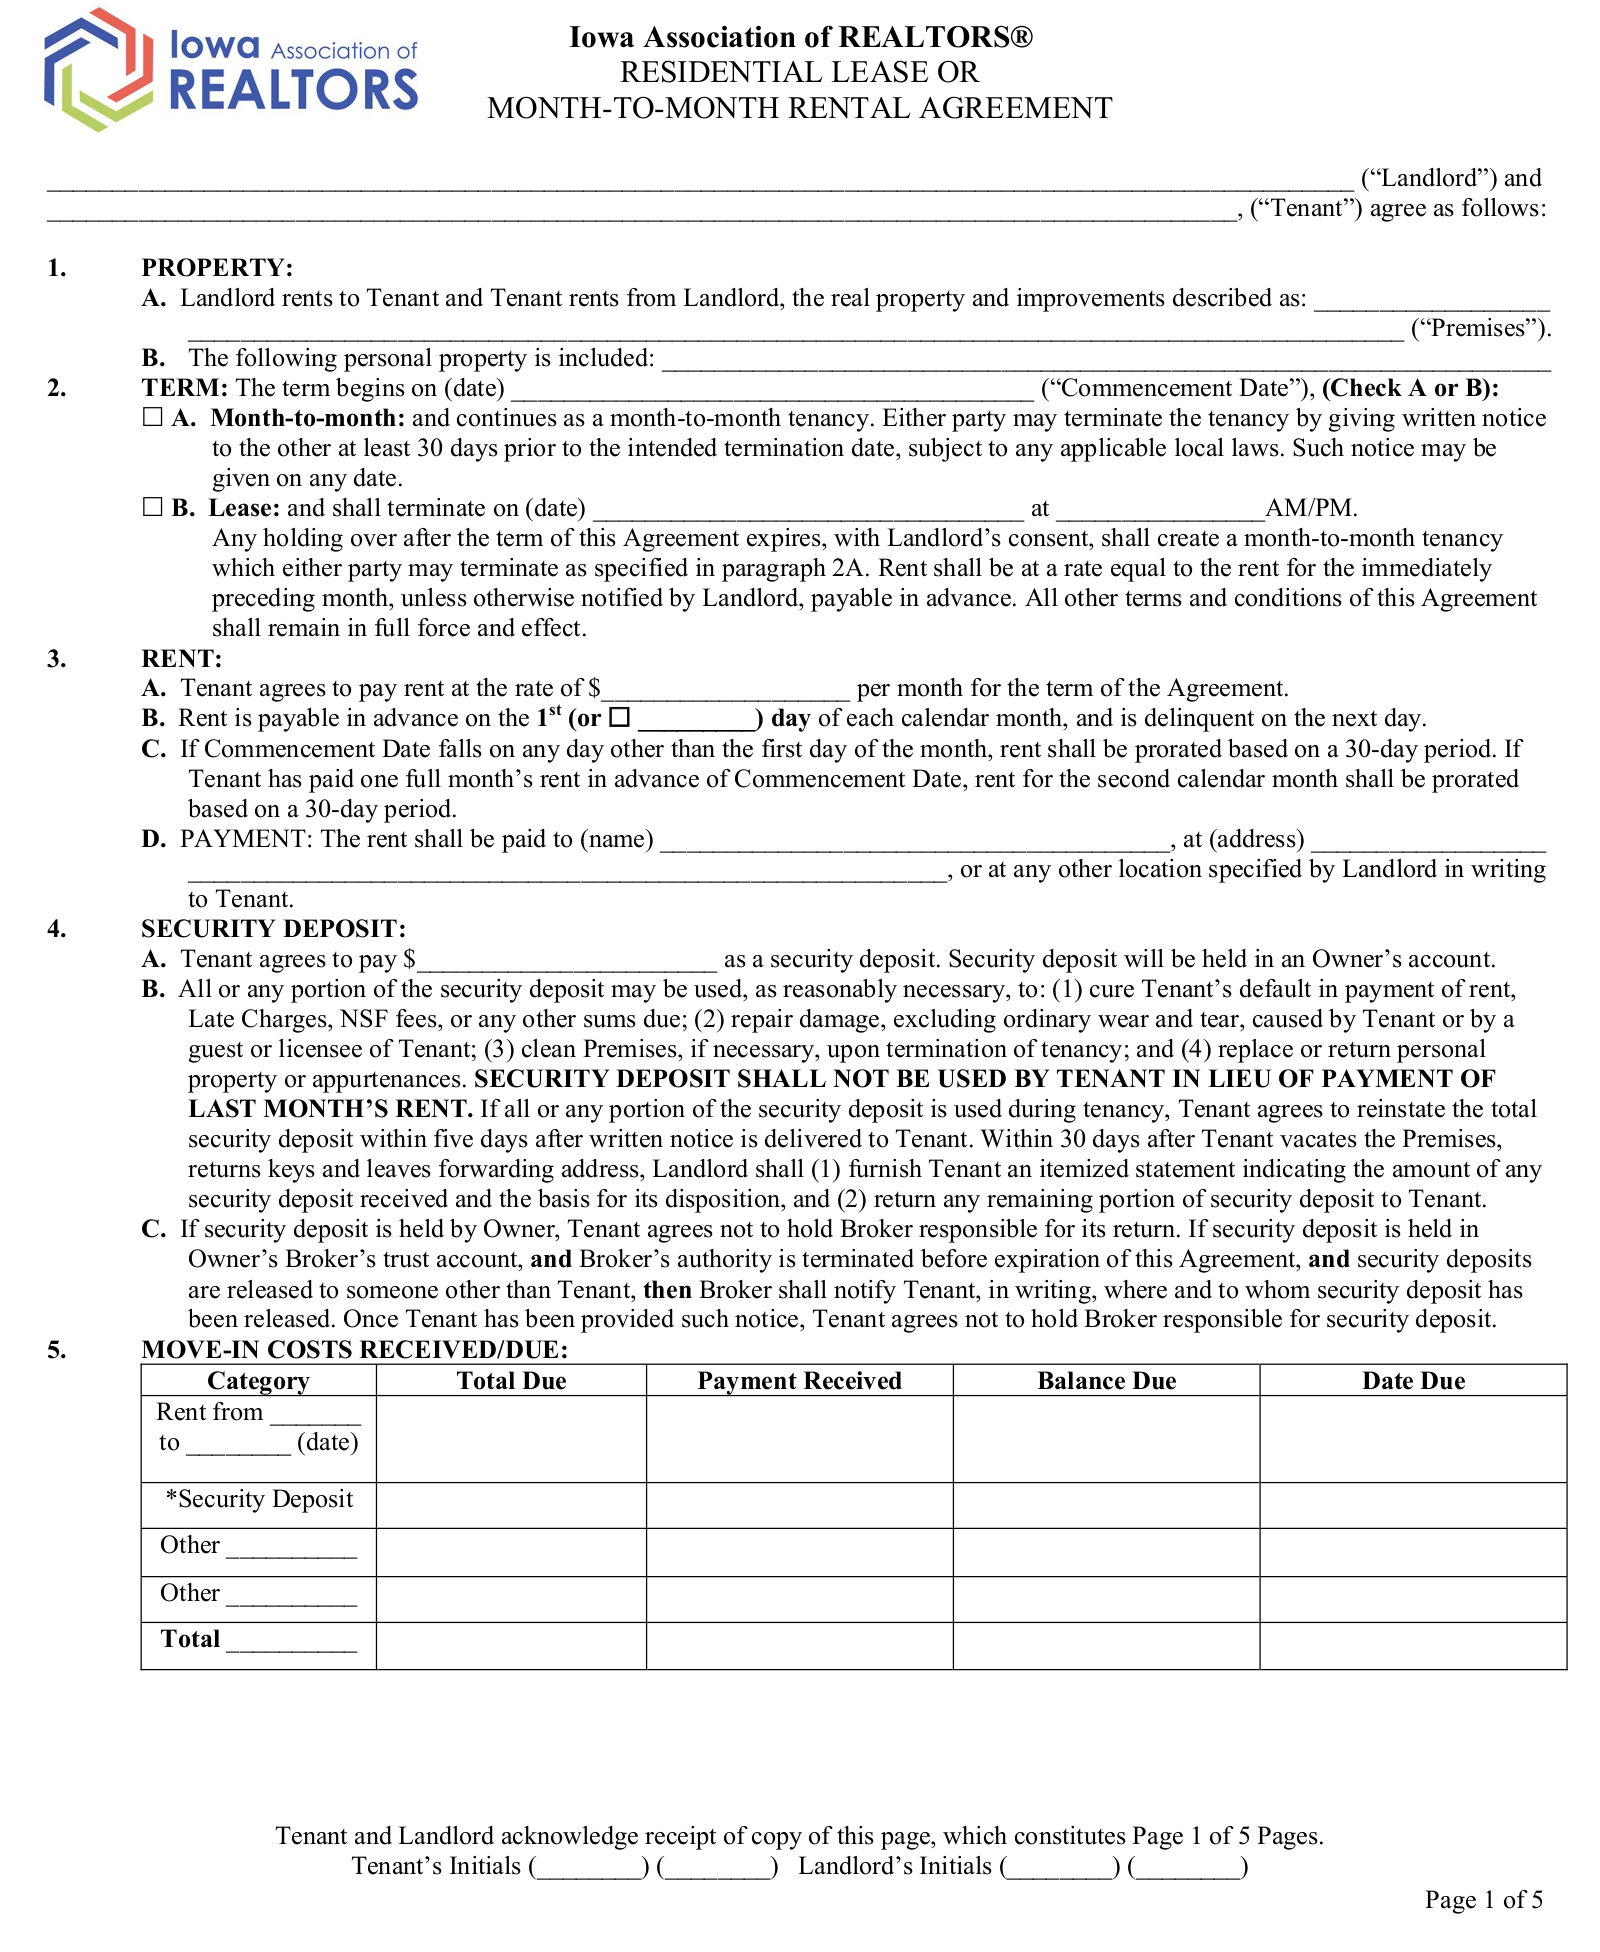 Iowa Association of Realtors Residential Lease Agreement